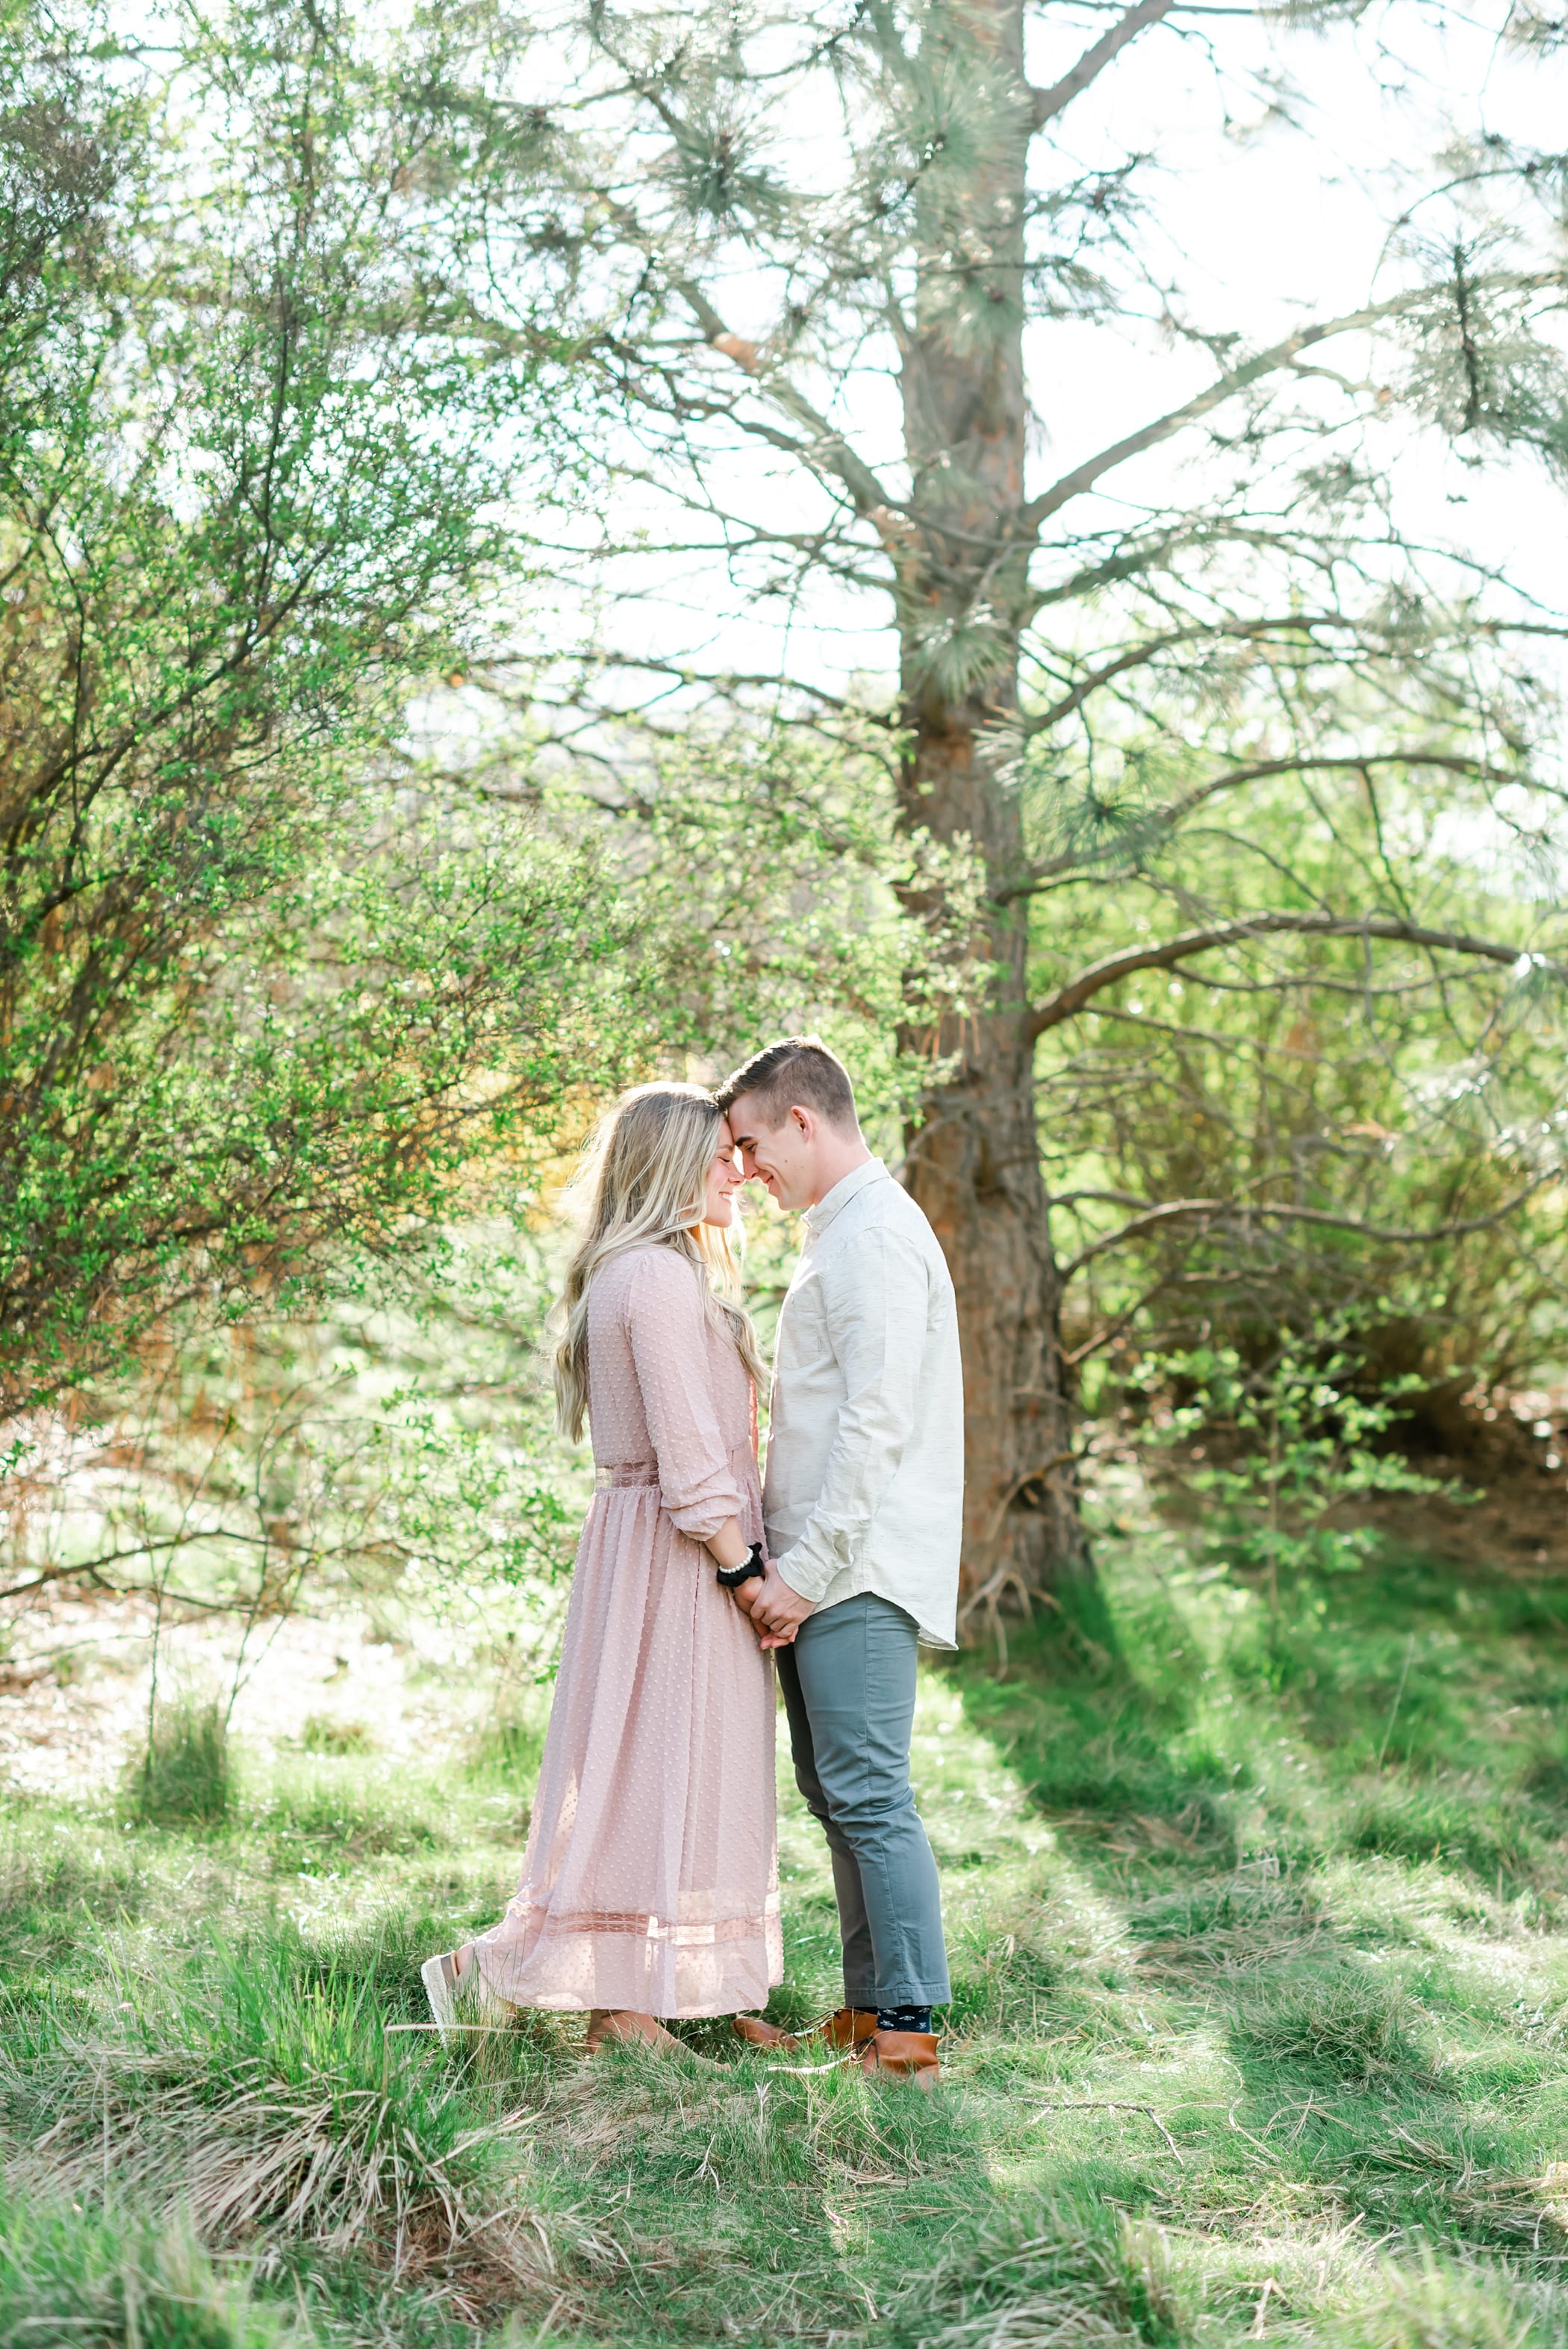 Spring engagements what to wear- blush dress and button up shirt